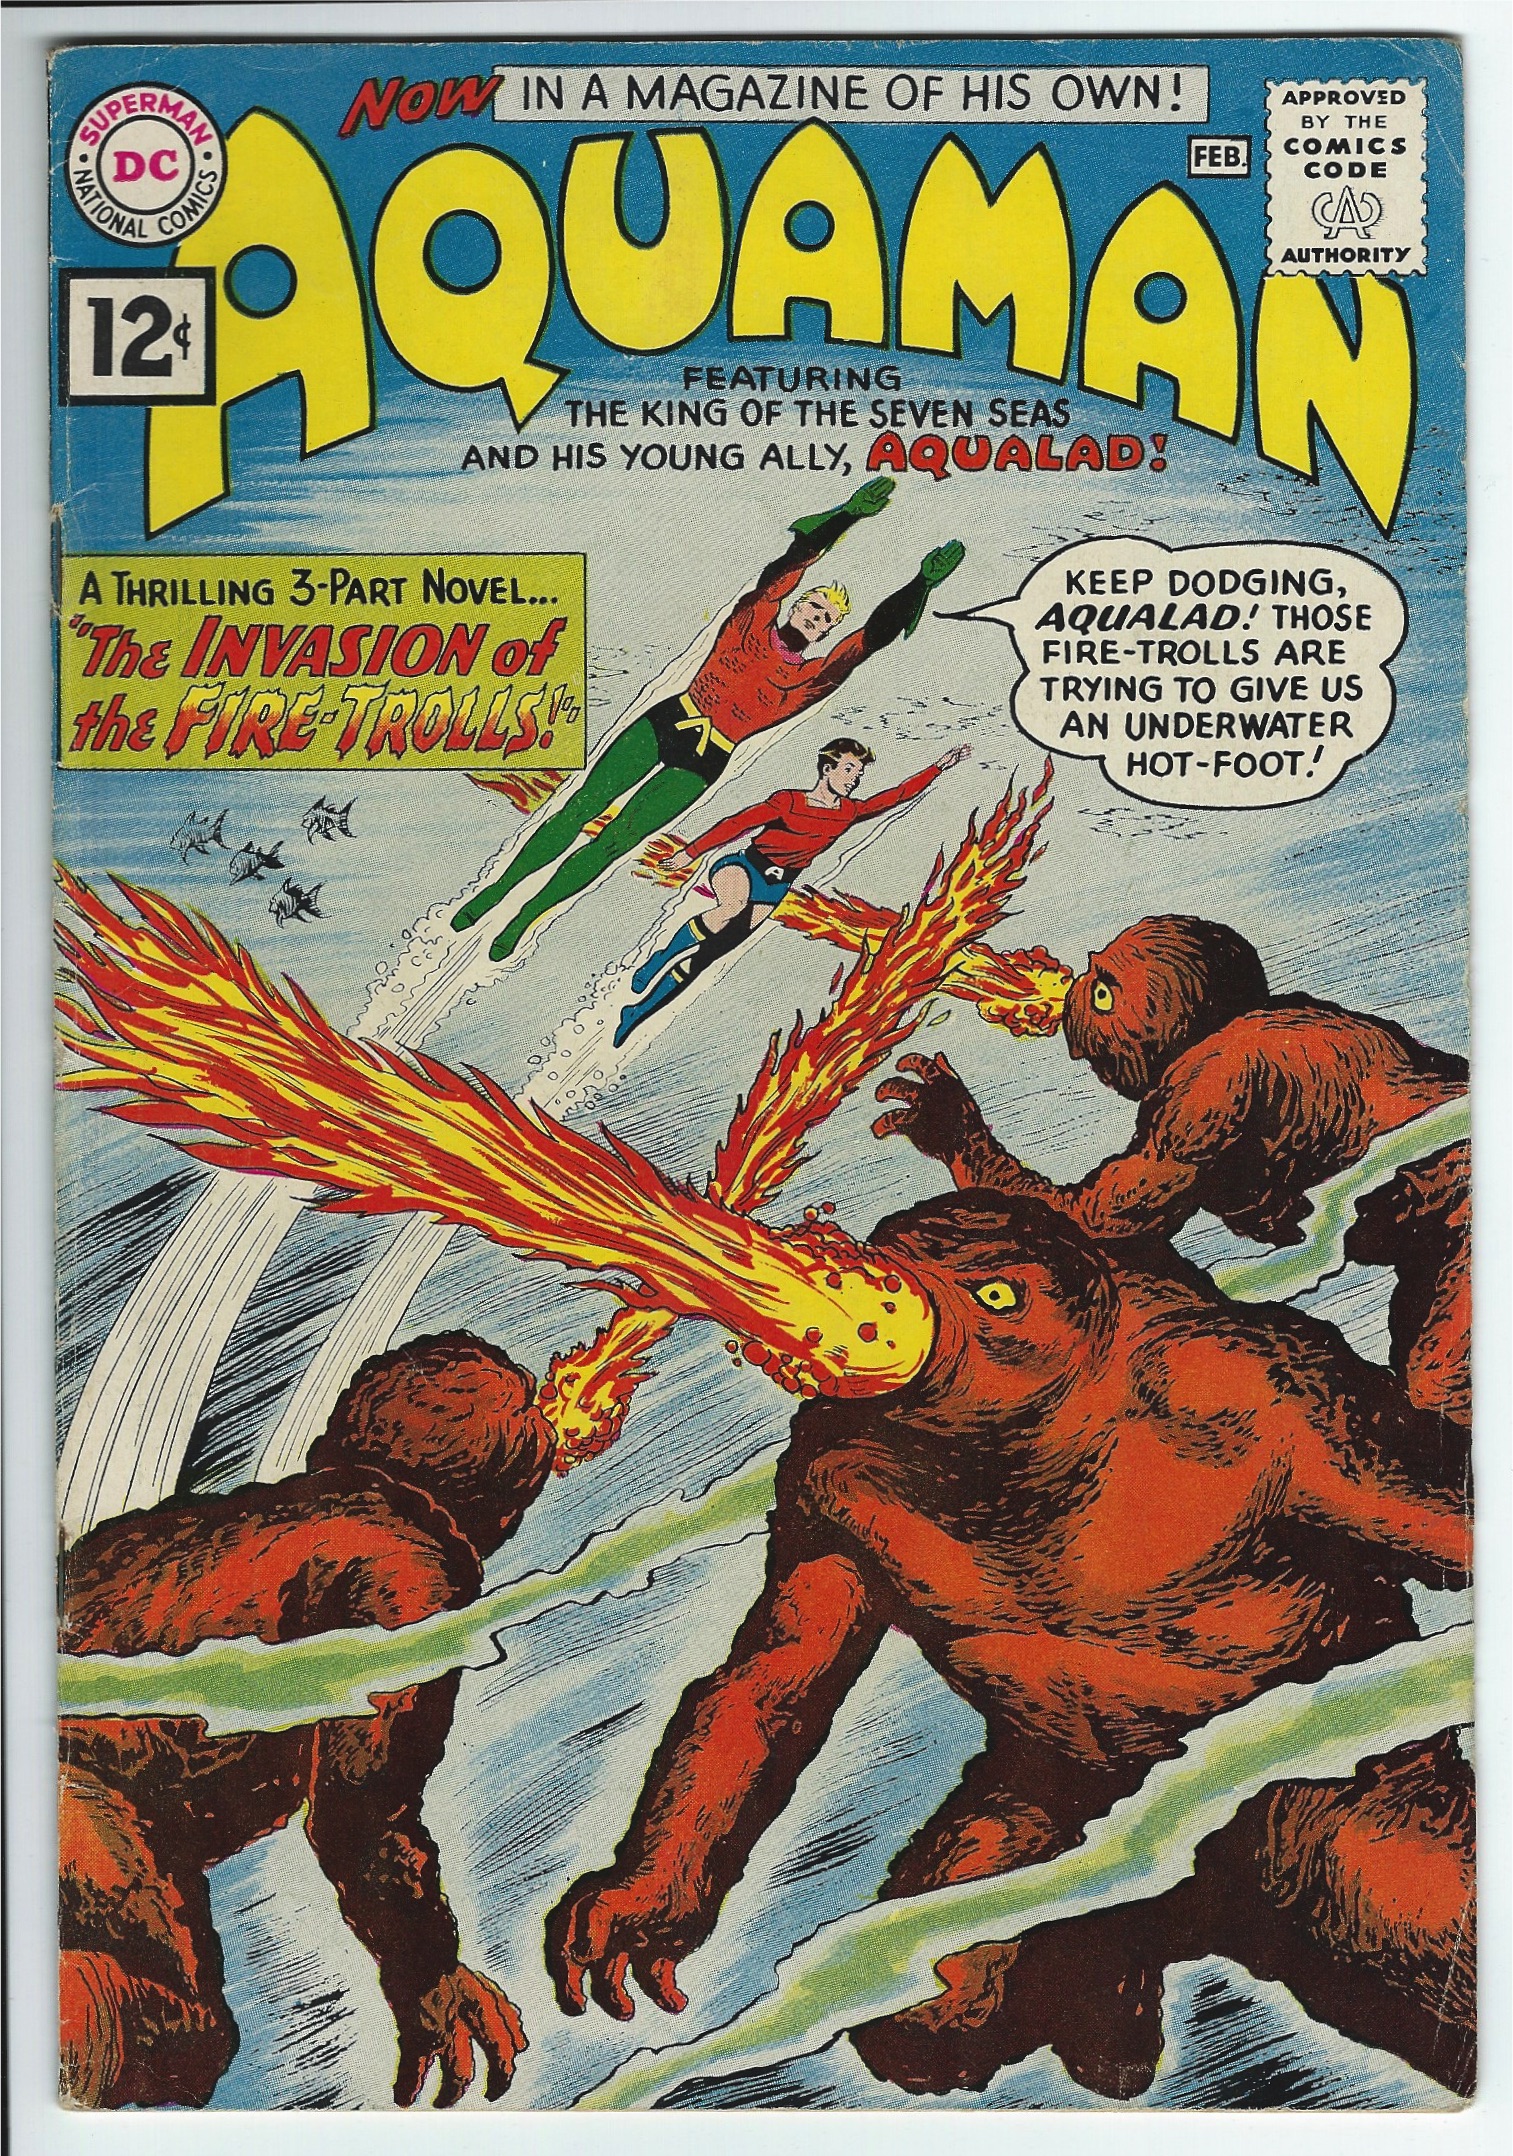 DC Comics Aquaman (1962) #1: First appearance in solo title